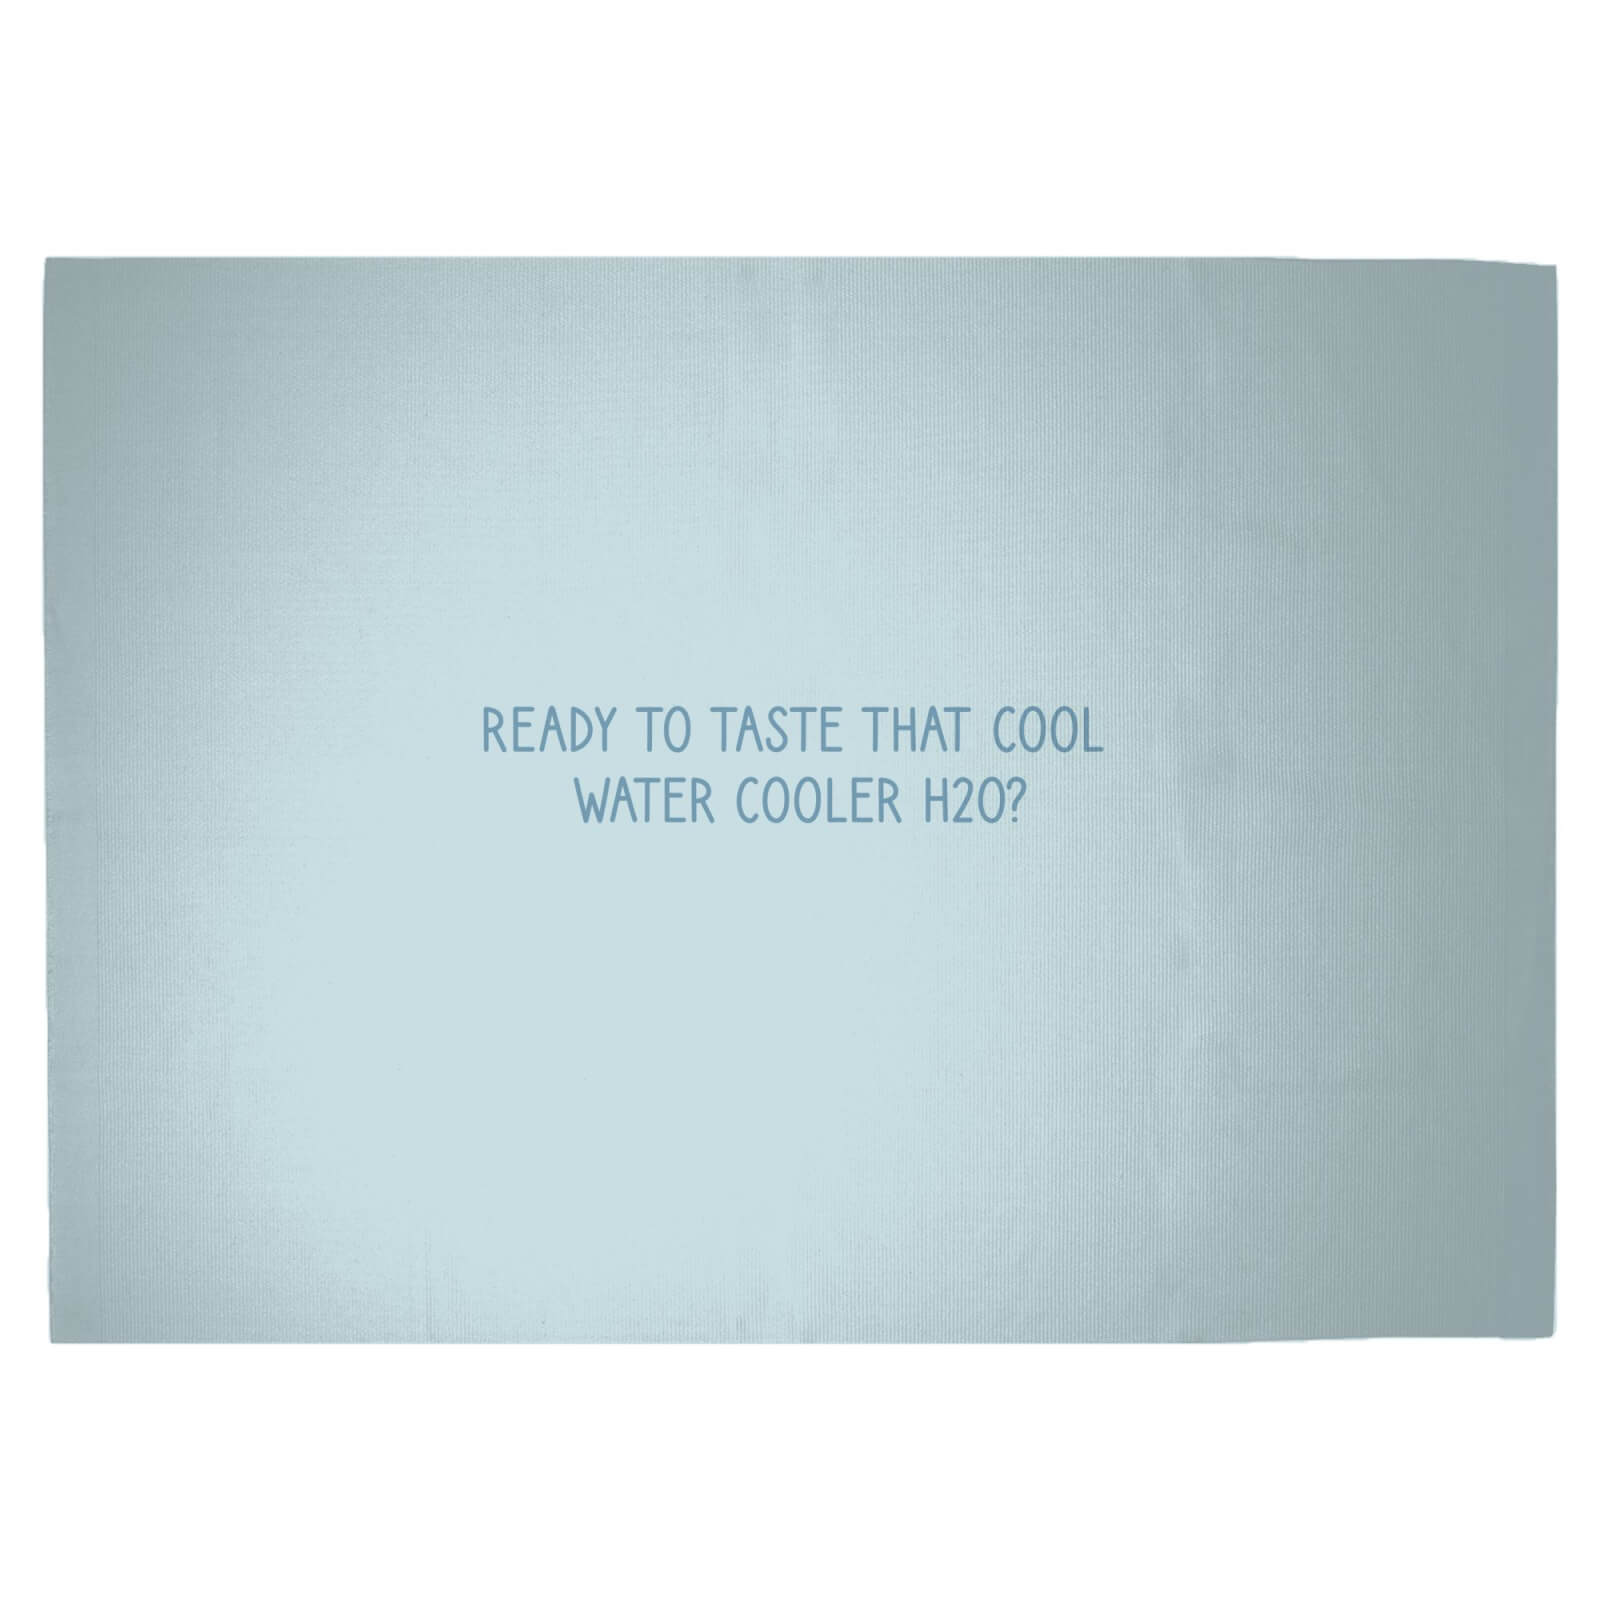 Ready To Taste That Cool Water Cooler H20 Woven Rug - Large